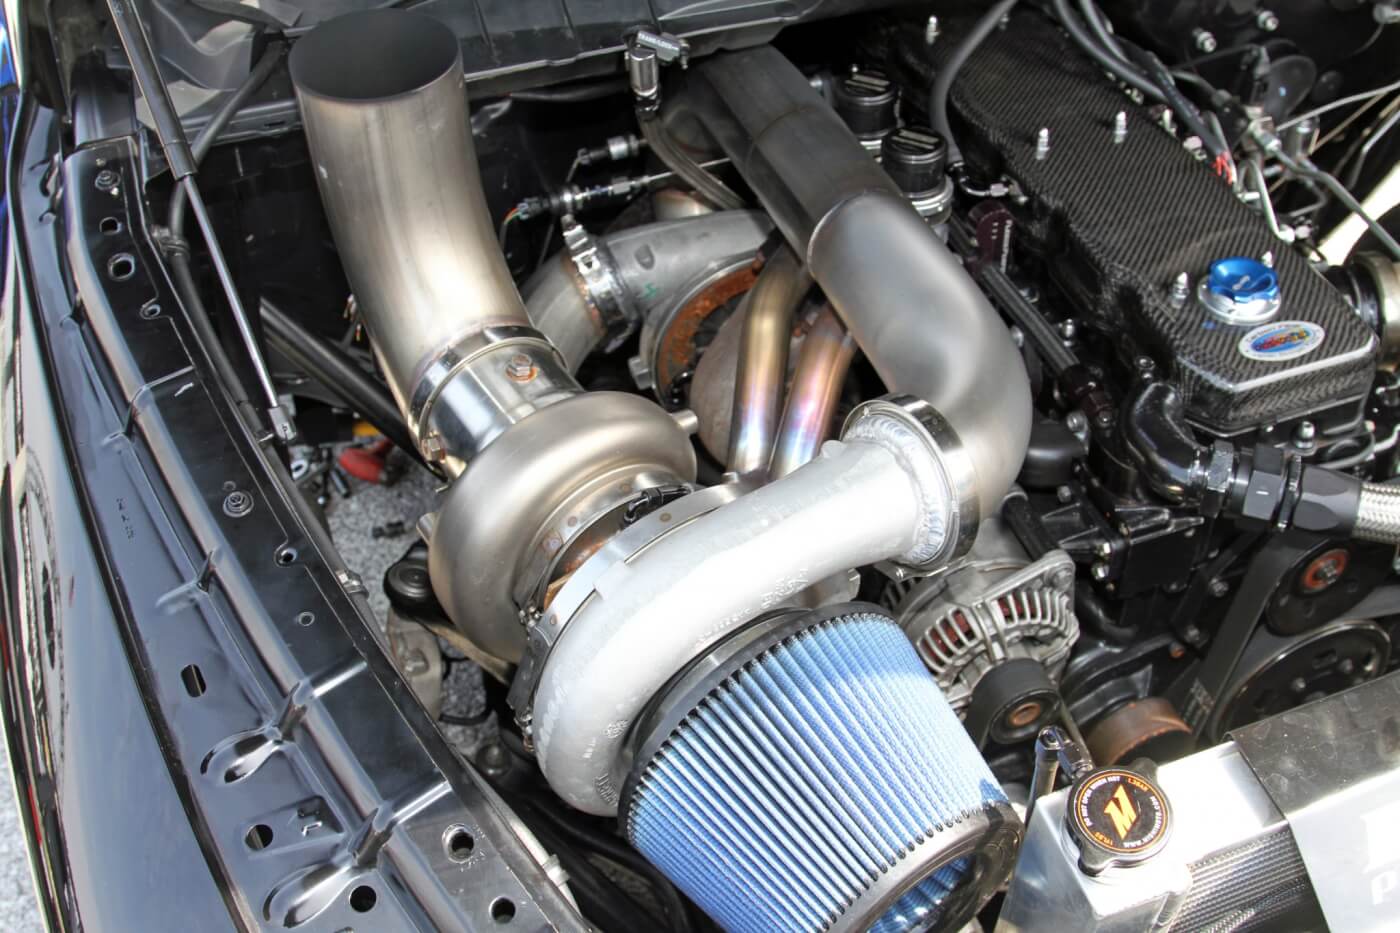 A large Garrett turbo is the primary, while a large Fleece Performance Engineering turbo is tucked under the Steed Speed manifold and custom stainless steel piping.